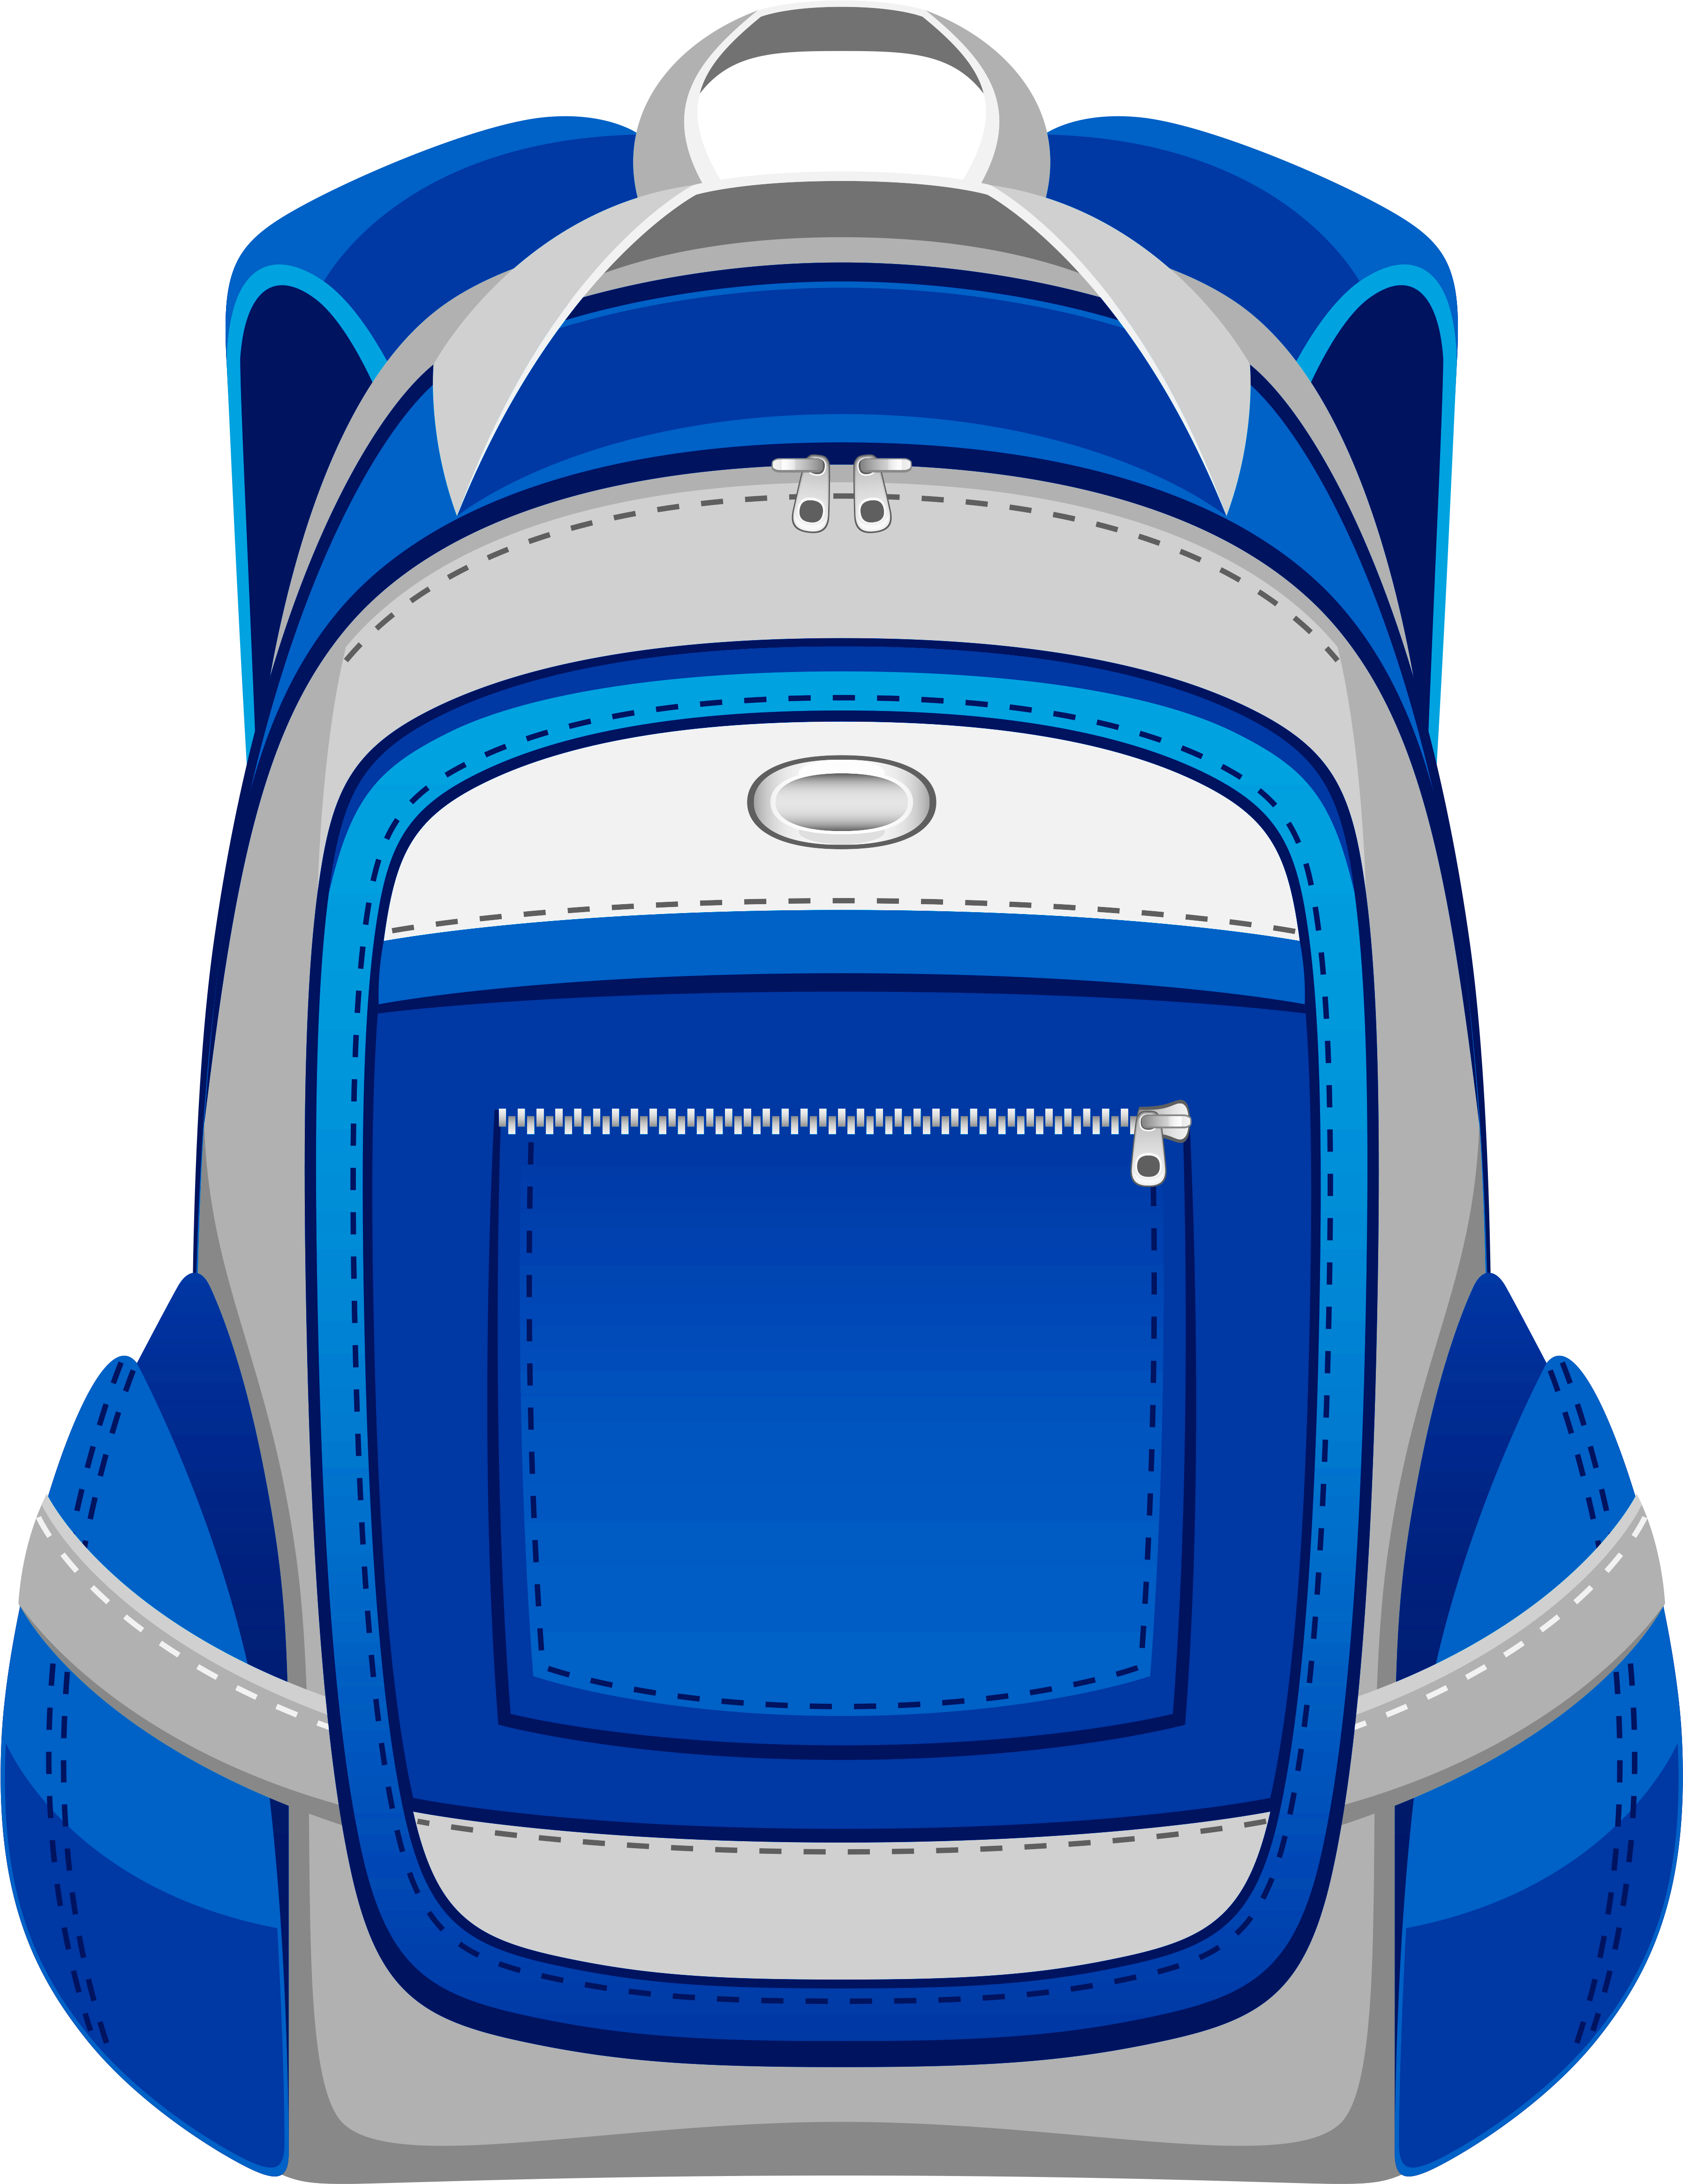 Blue And Grey Backpack Png Vector Clipartu200b Gallery - Free Clip Art Backpack (3838x4890)